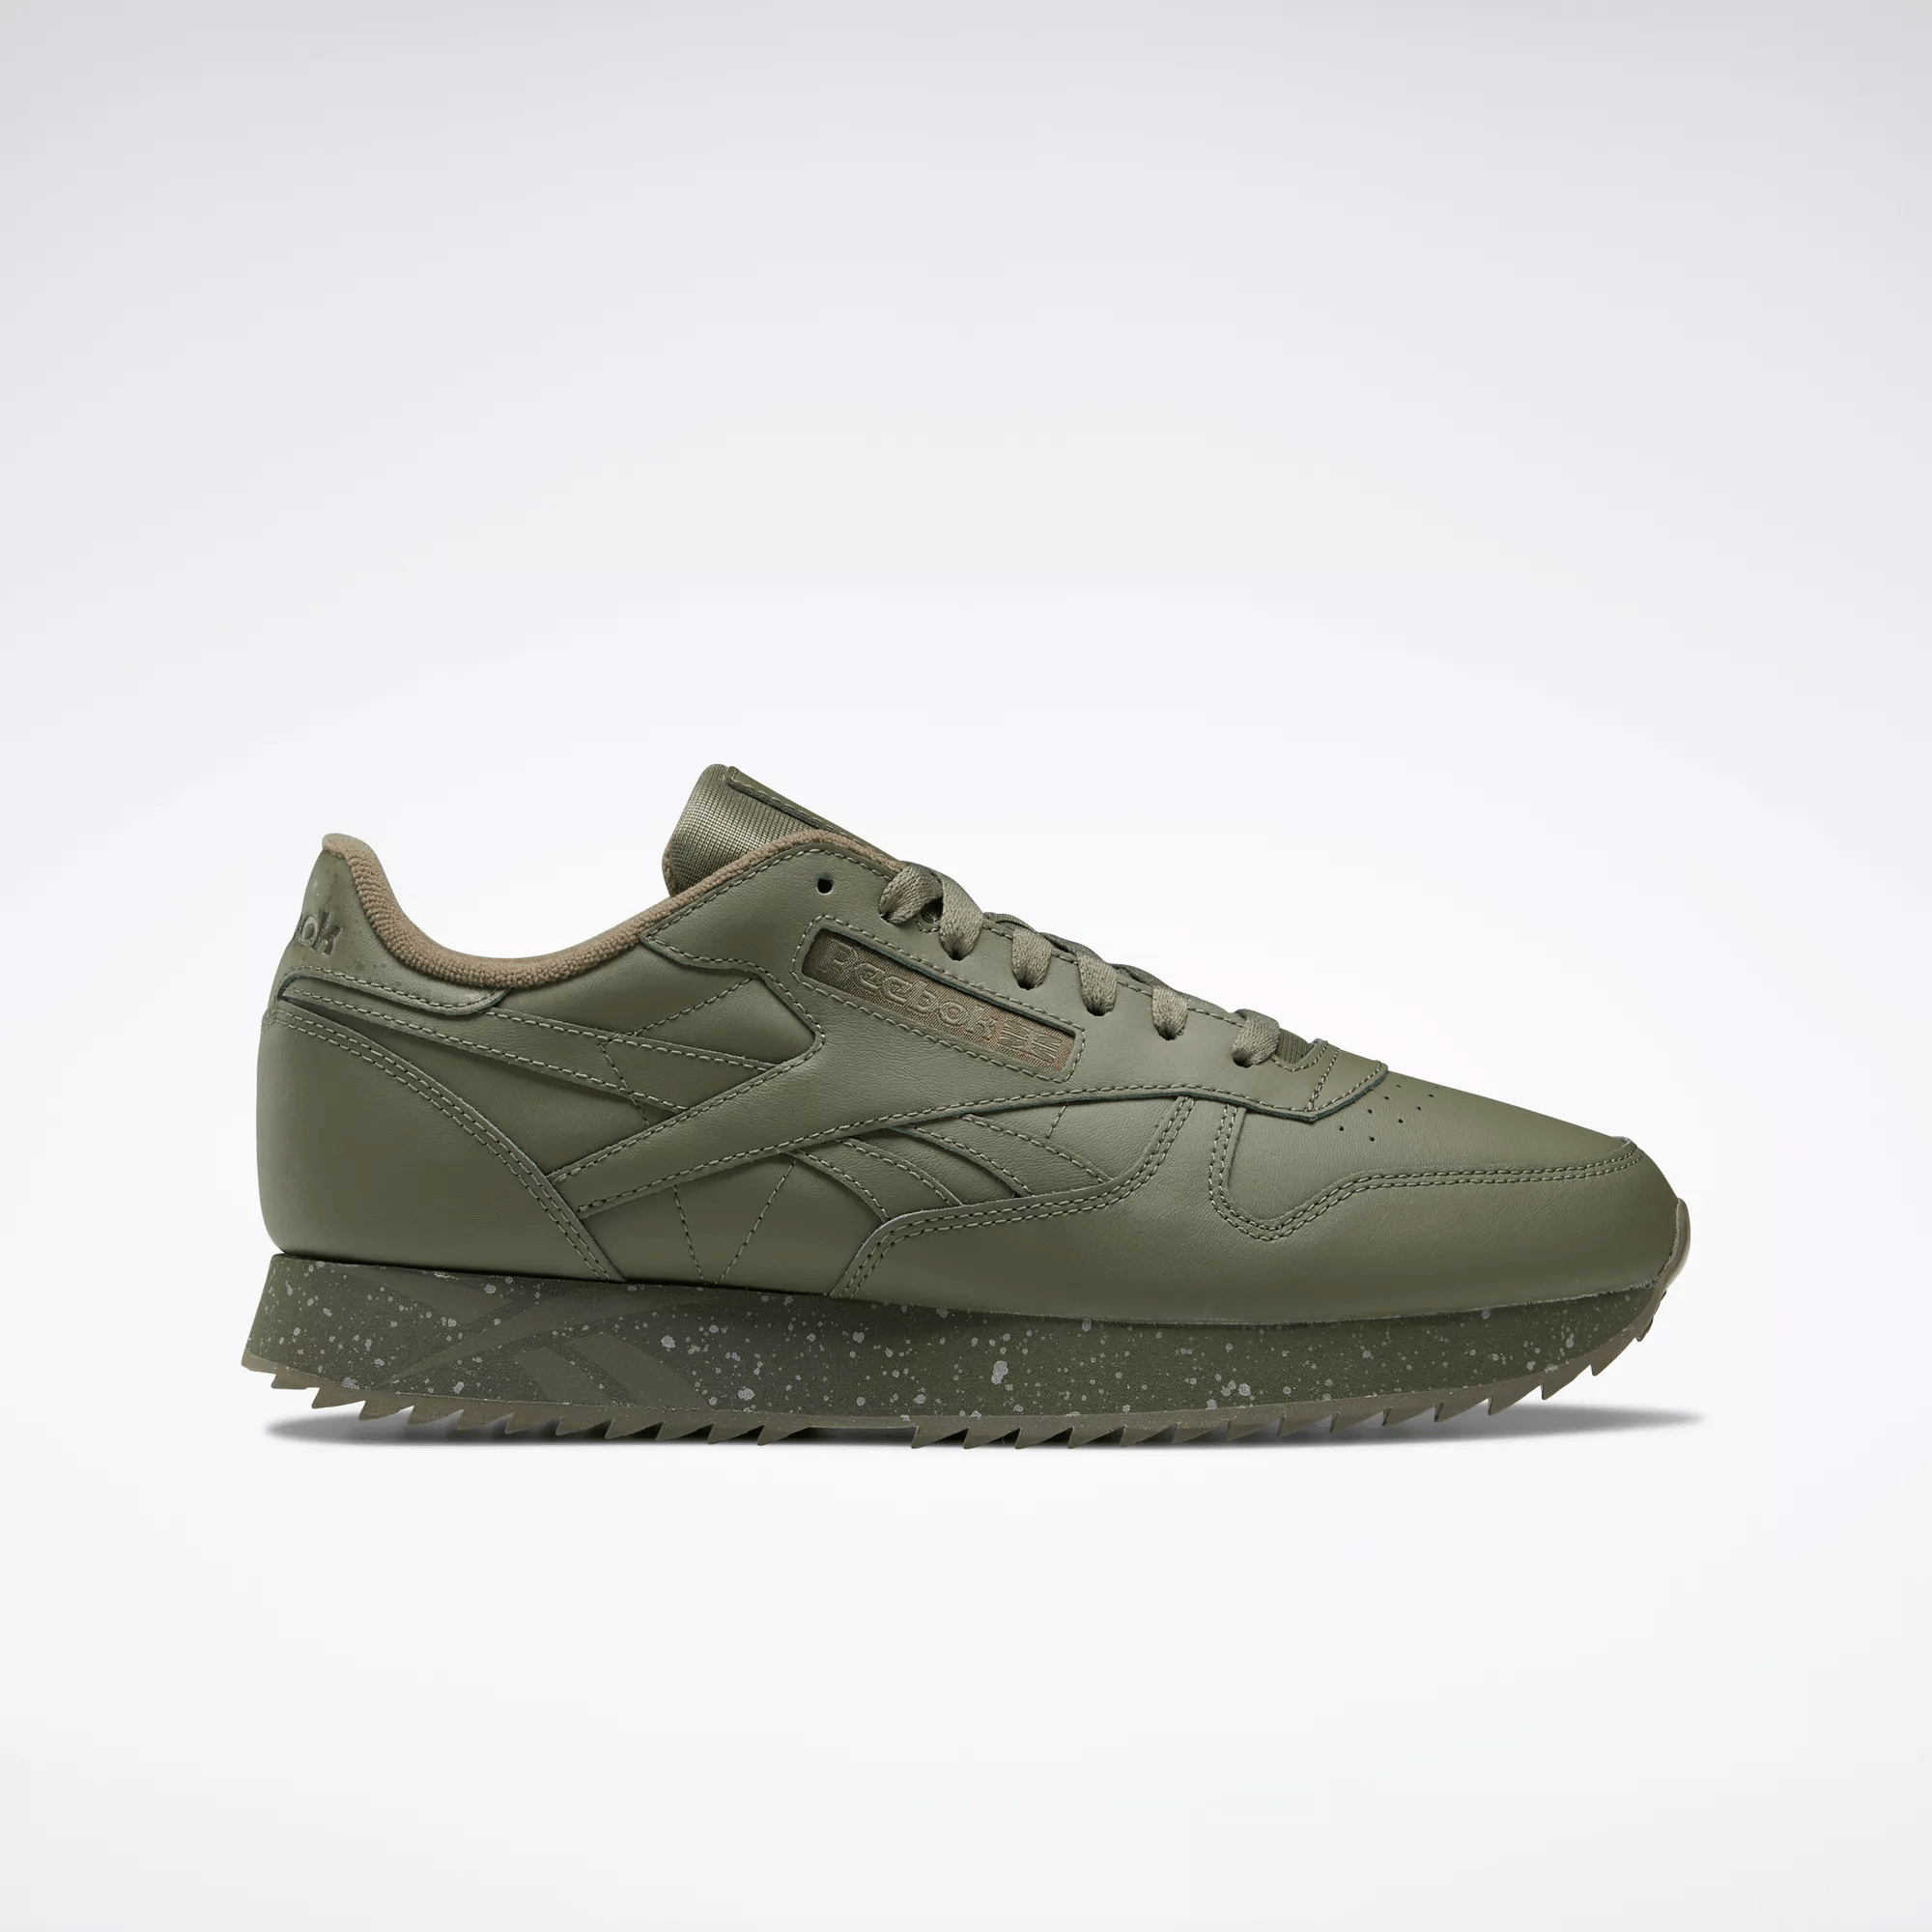 REEBOK CLASSIC LEATHER RIPPLE SHOES